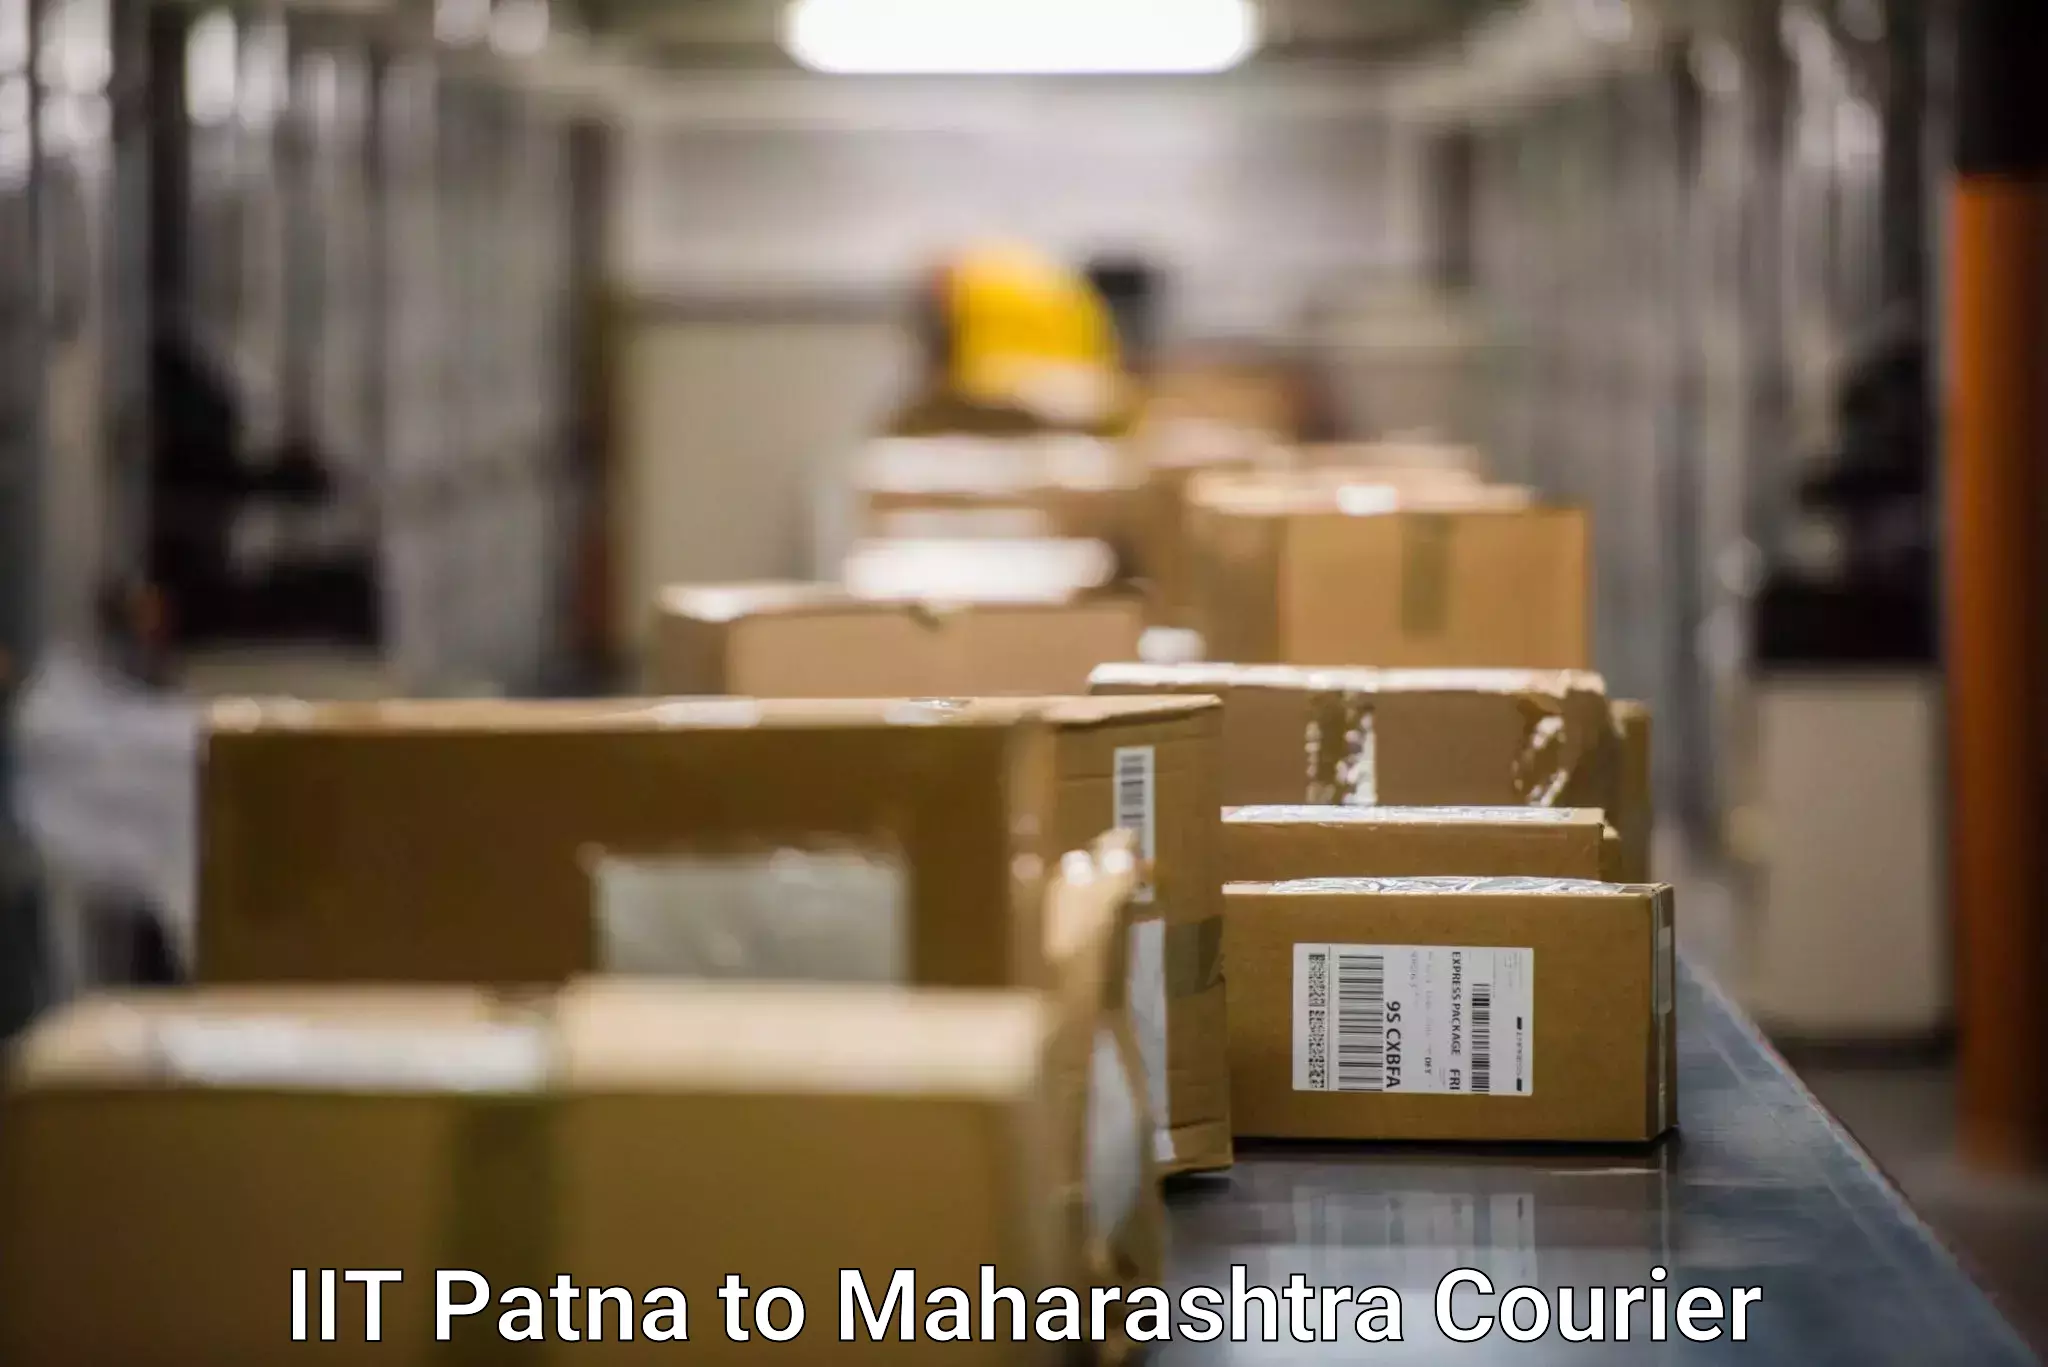 Fast-track shipping solutions in IIT Patna to DY Patil Vidyapeeth Mumbai